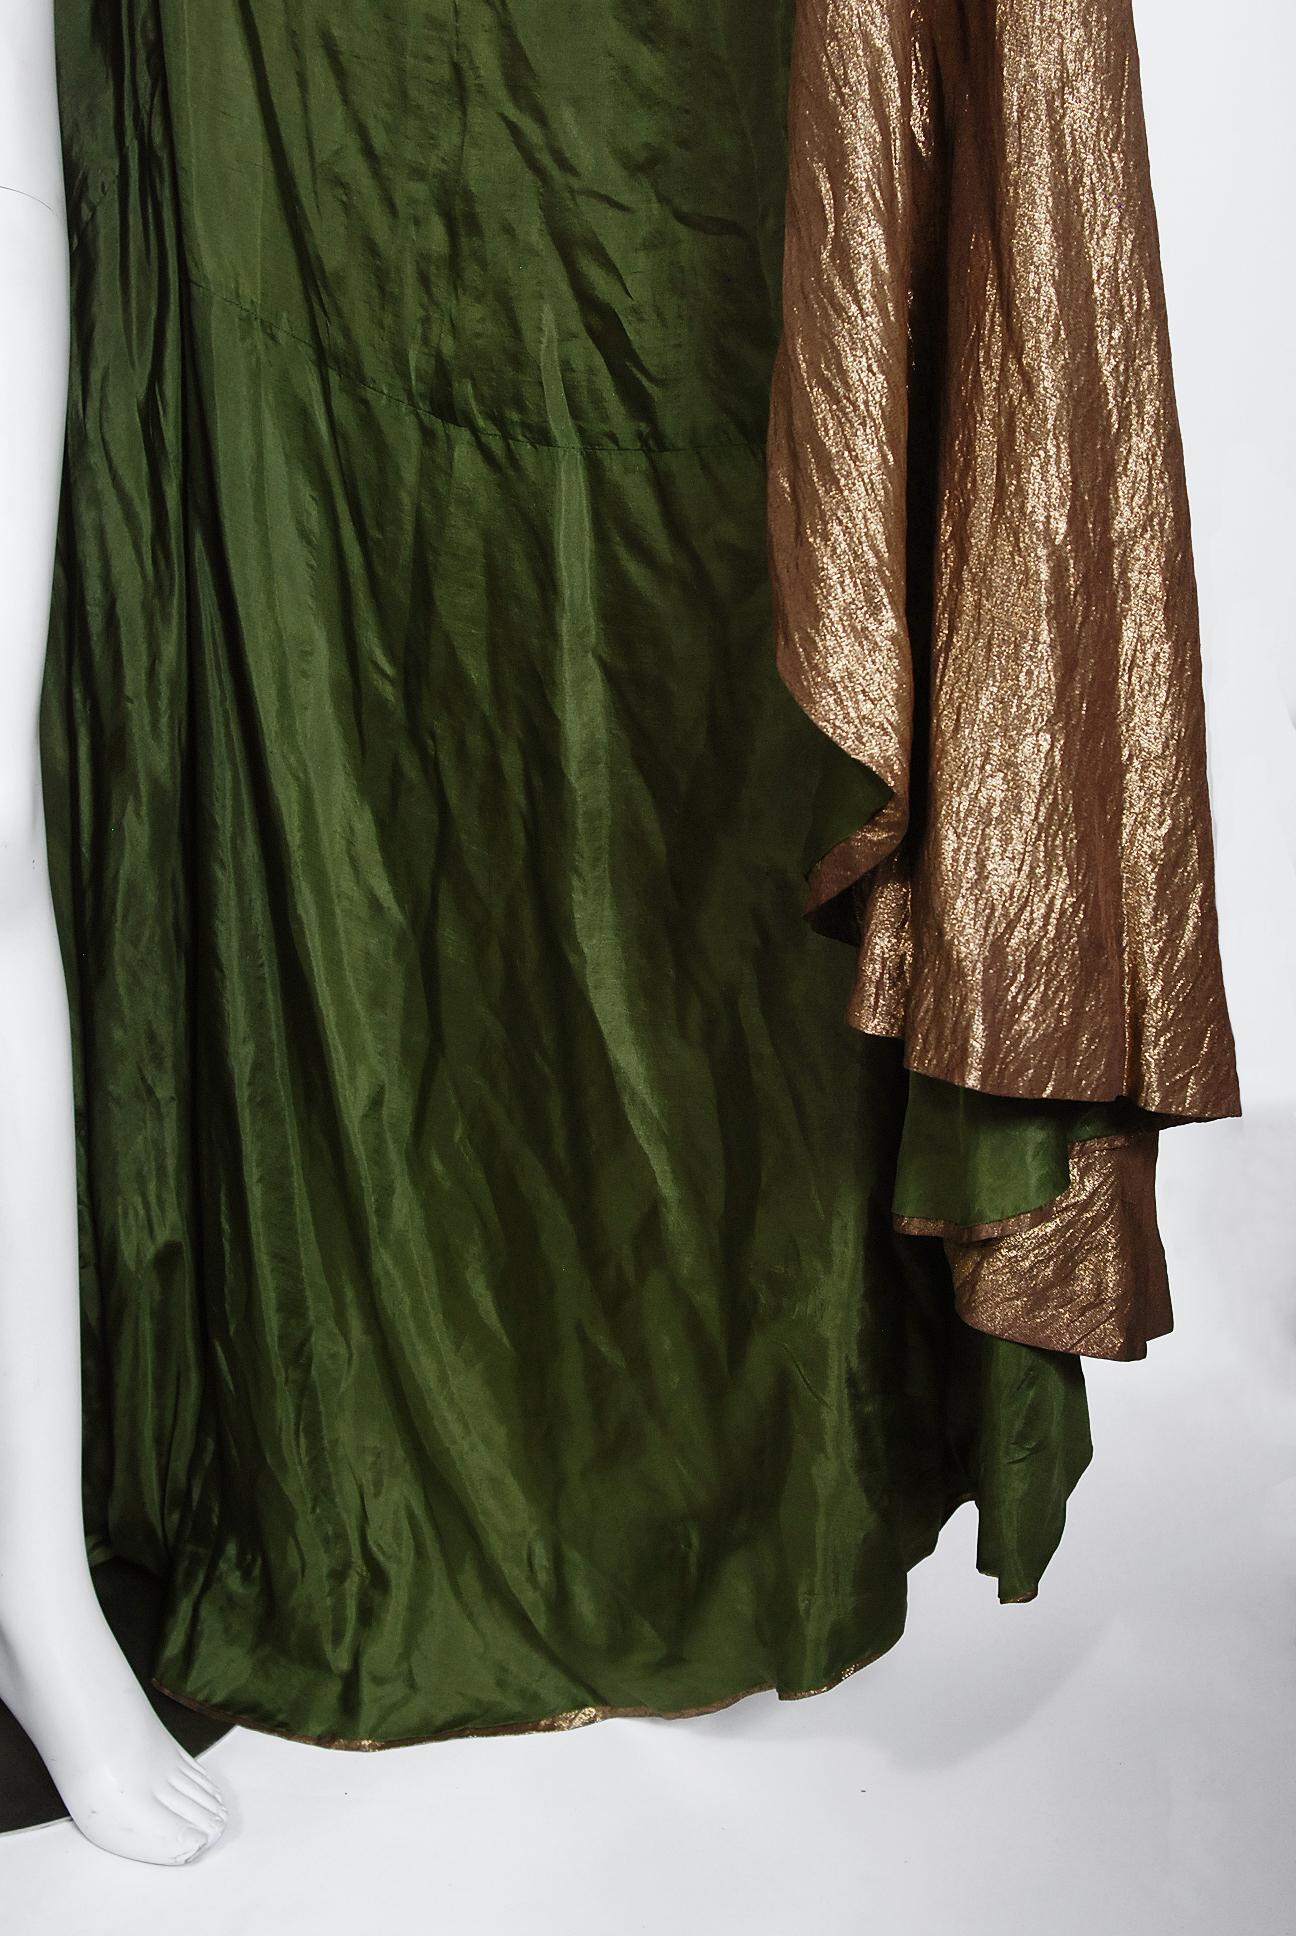 Brown Vintage 1940's Paramount Film-Worn Metallic Gold Lamé Full Length Trained Cape